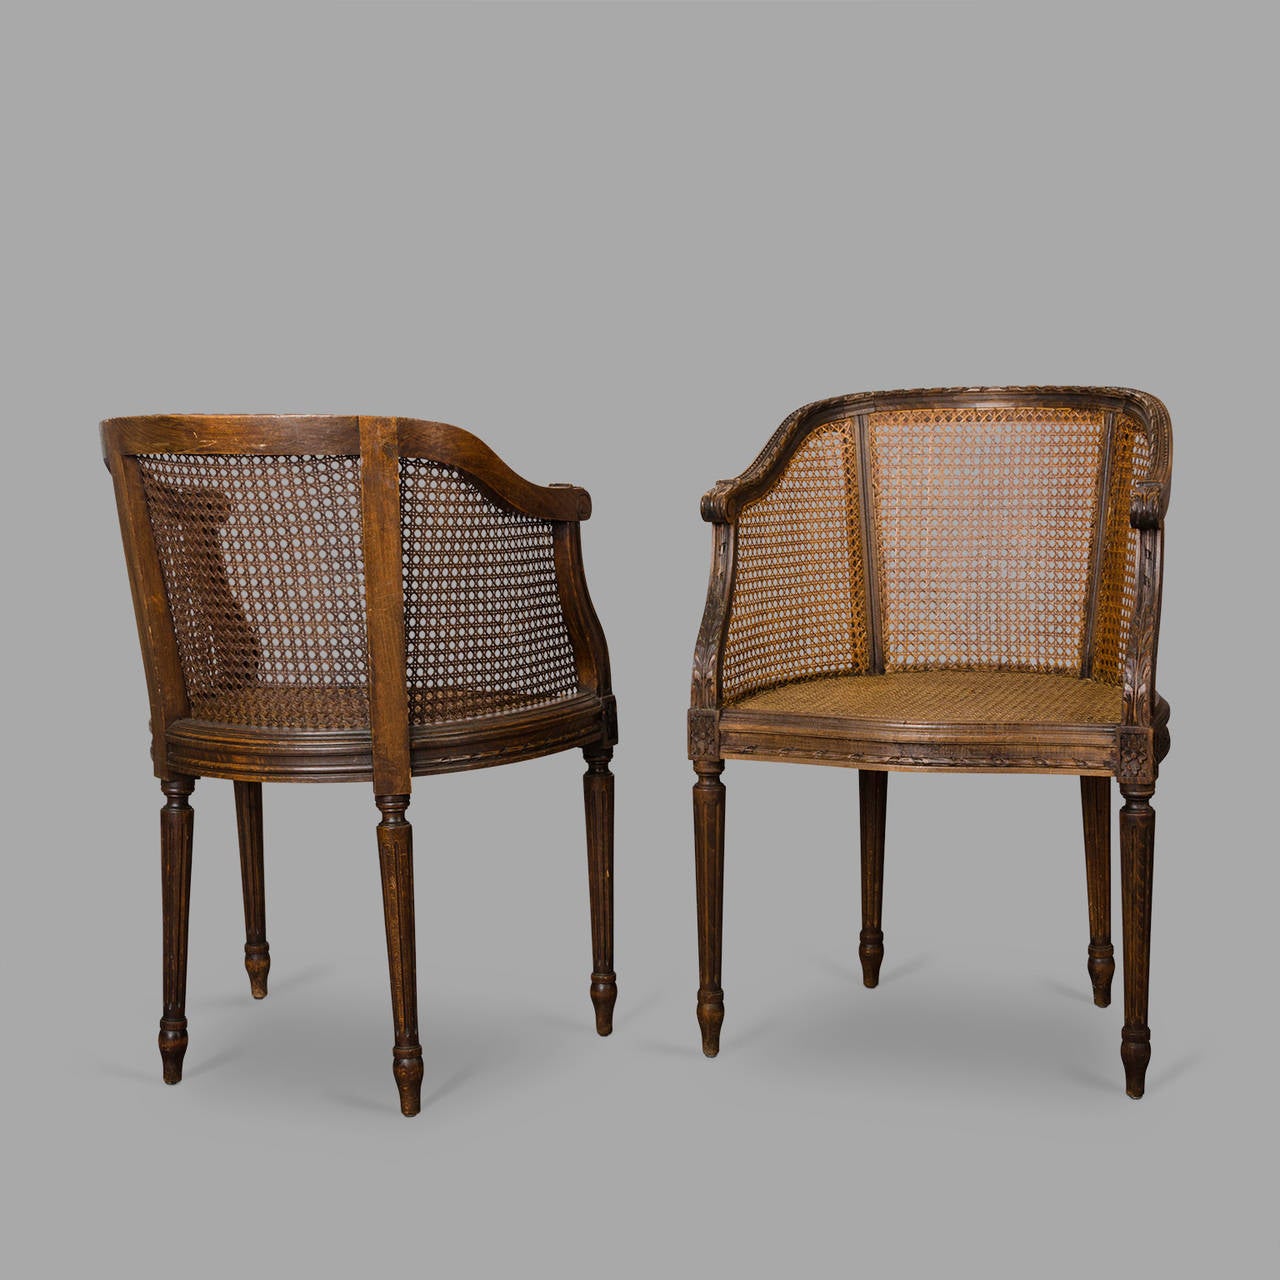 Pair of end of 19th century carved oak armchairs.
The caning is in good condition and these armchairs are ready to be used as is.